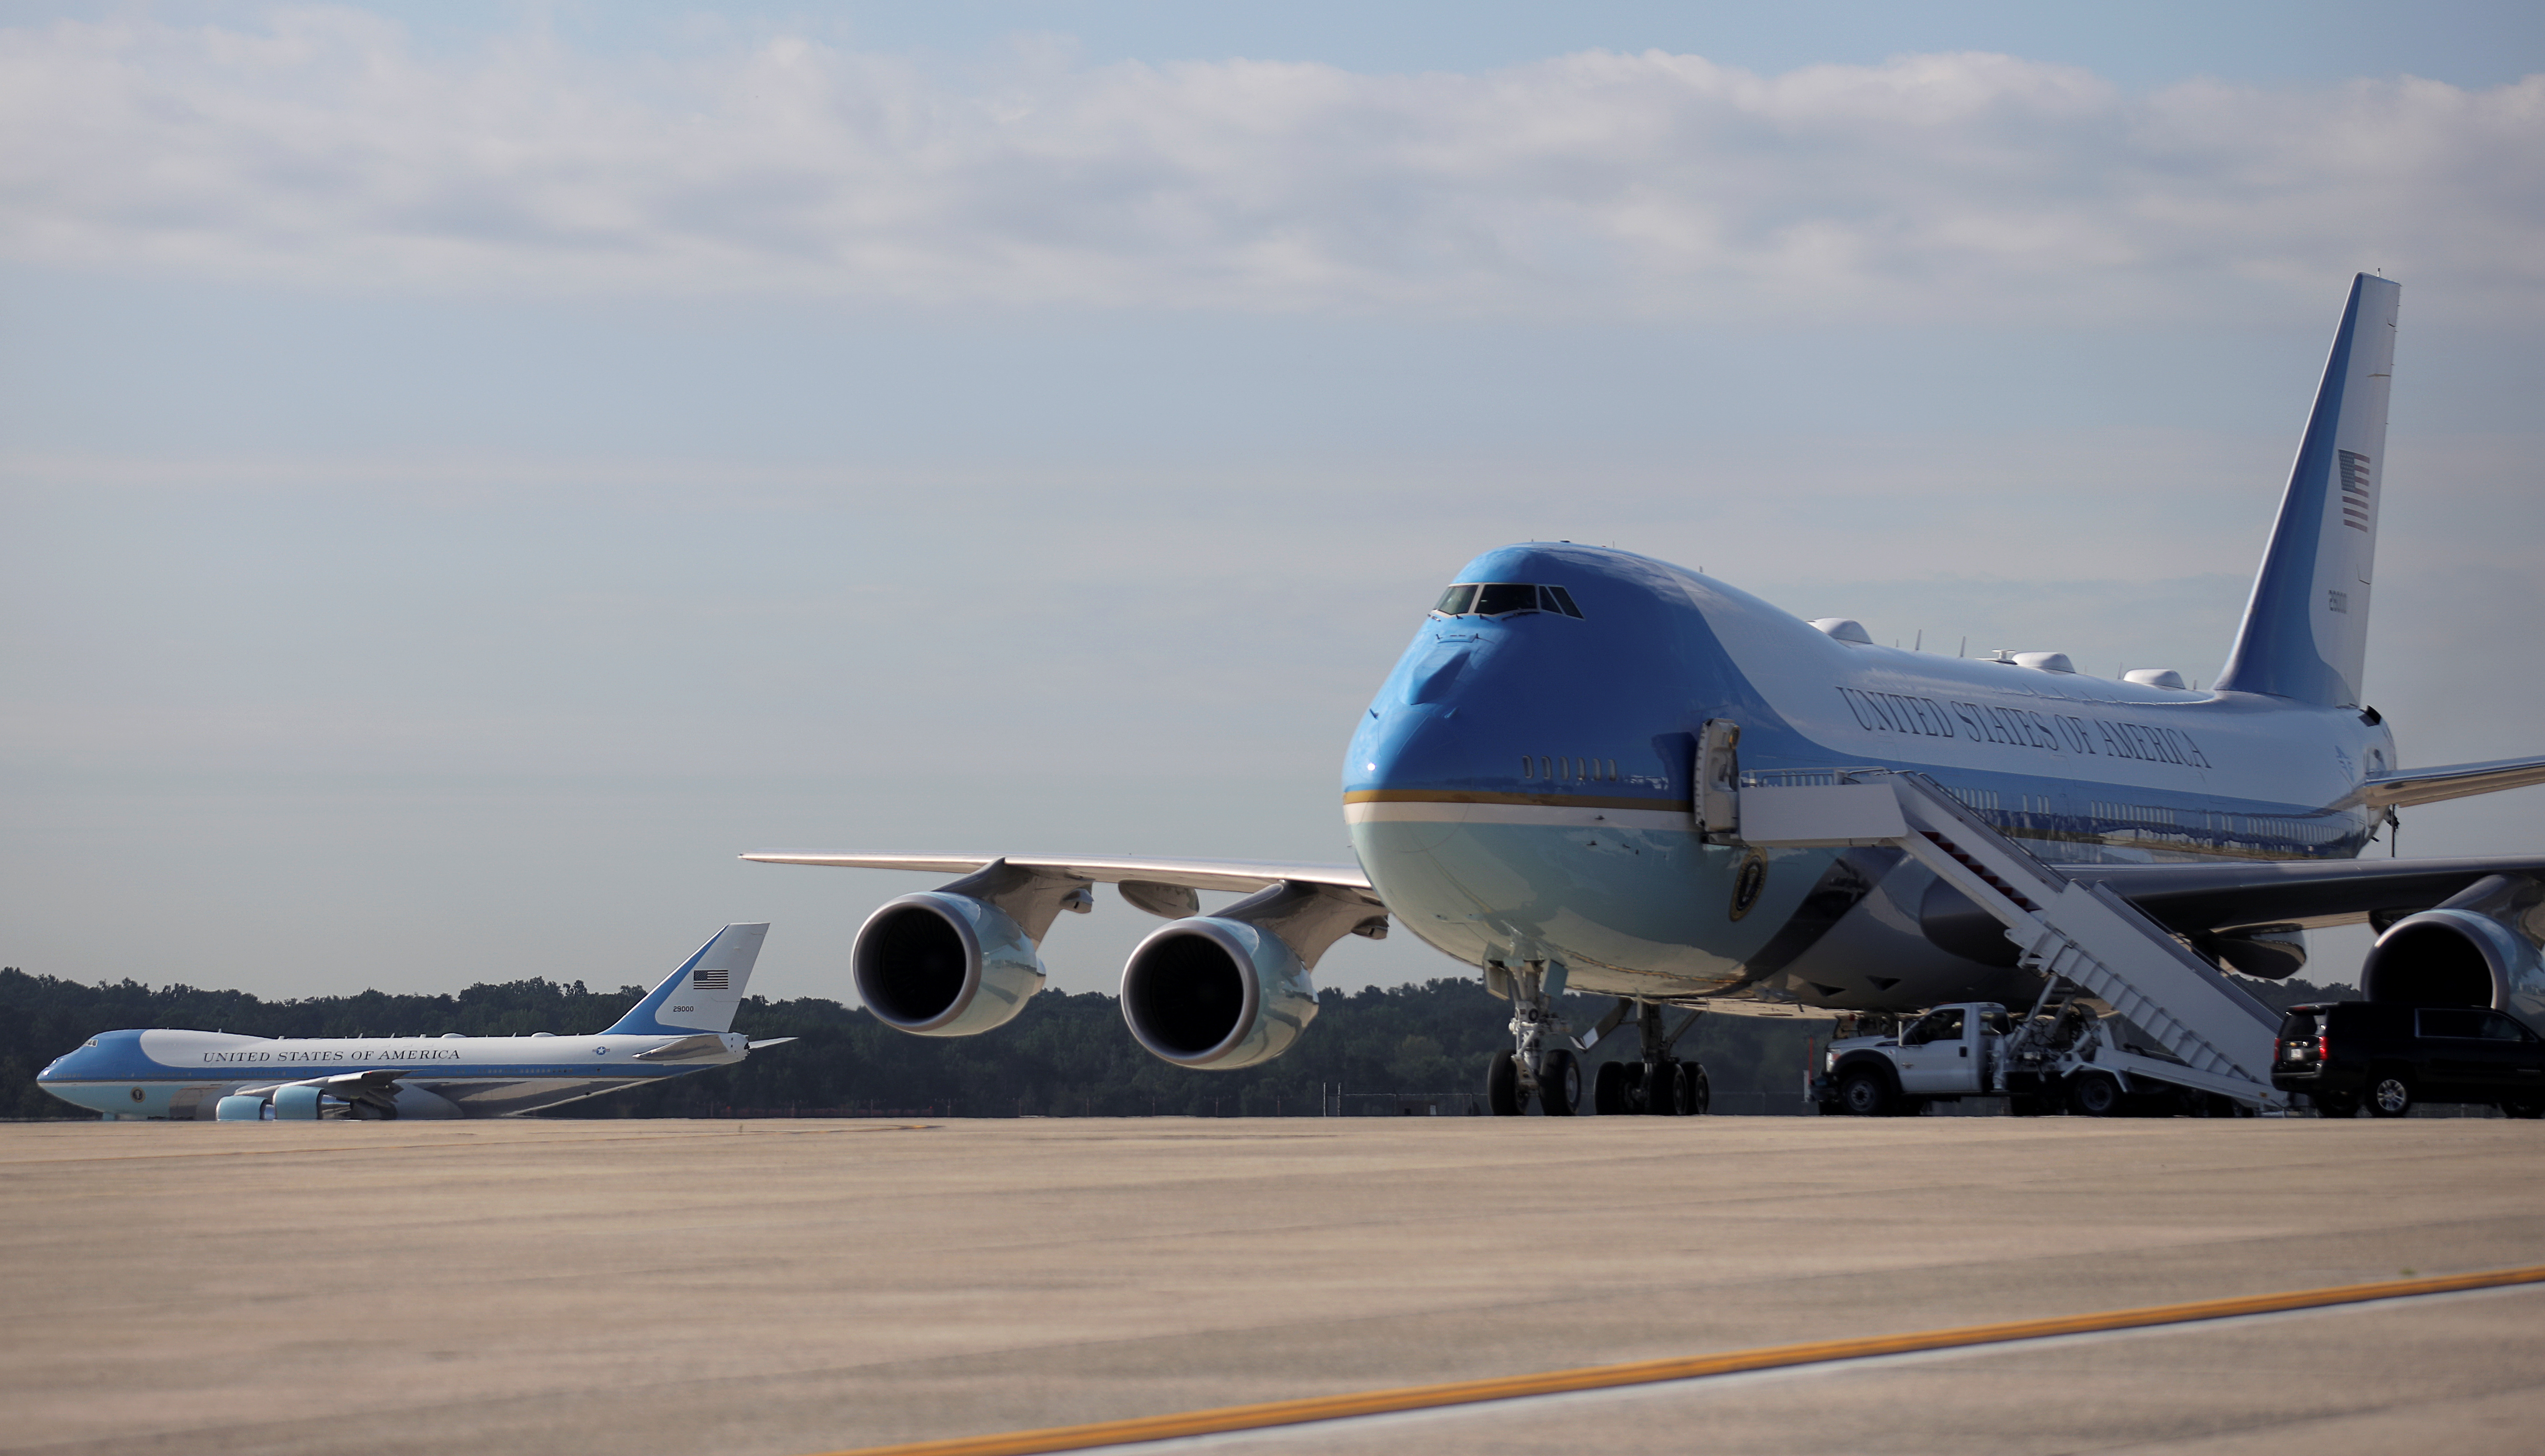 A pair of Boeing 747 Air Force One presidential aircraft are seen at Joint Base Andrews in Maryland